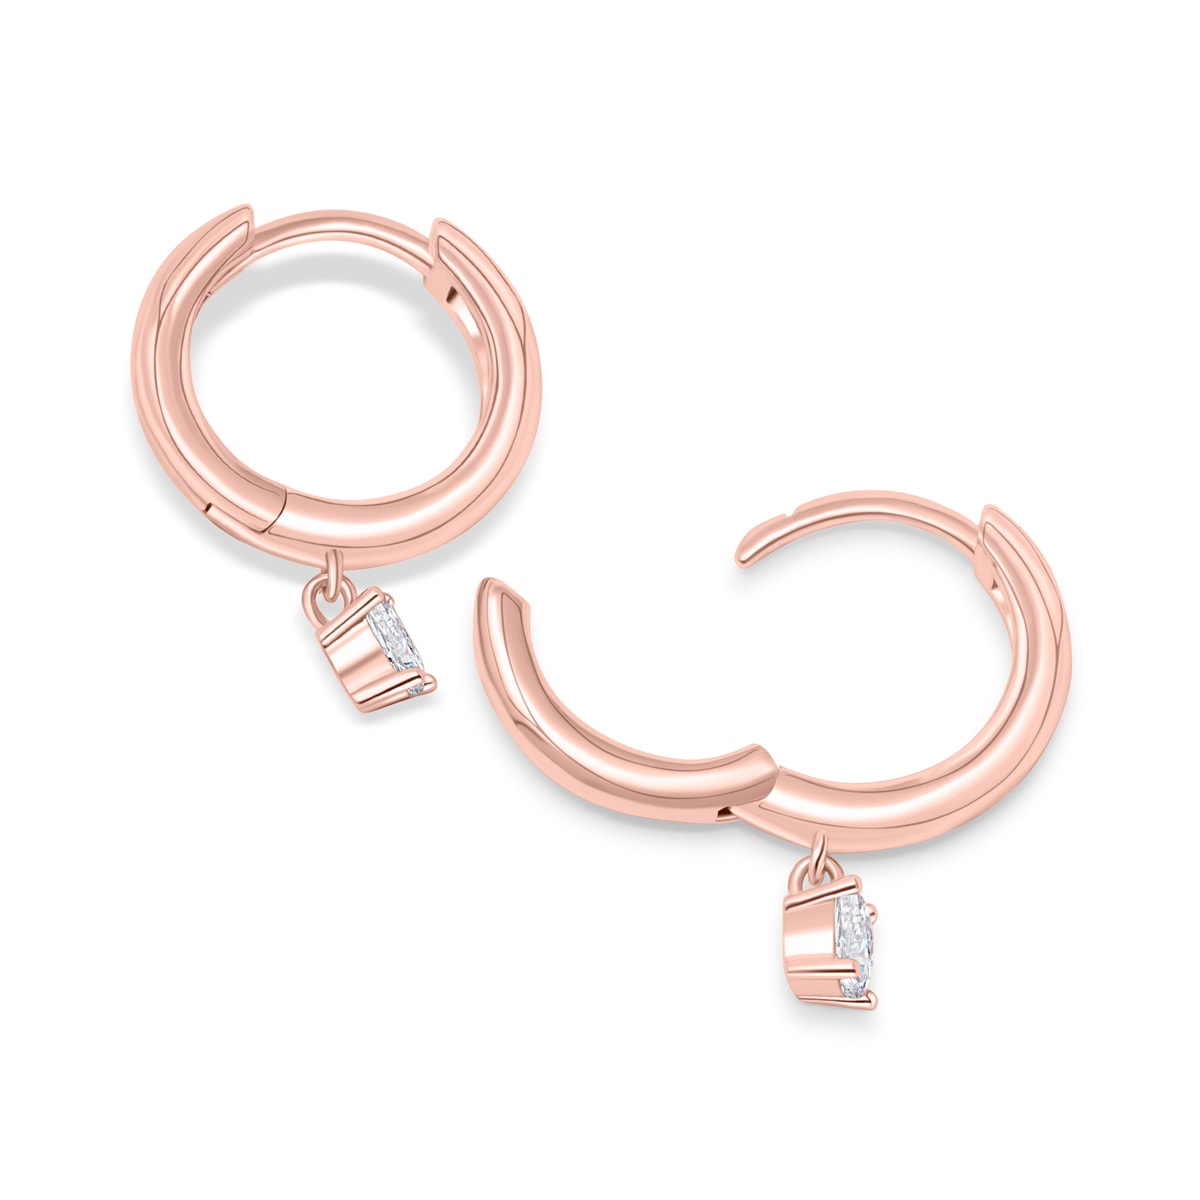 Affordable rose gold small hoop earrings